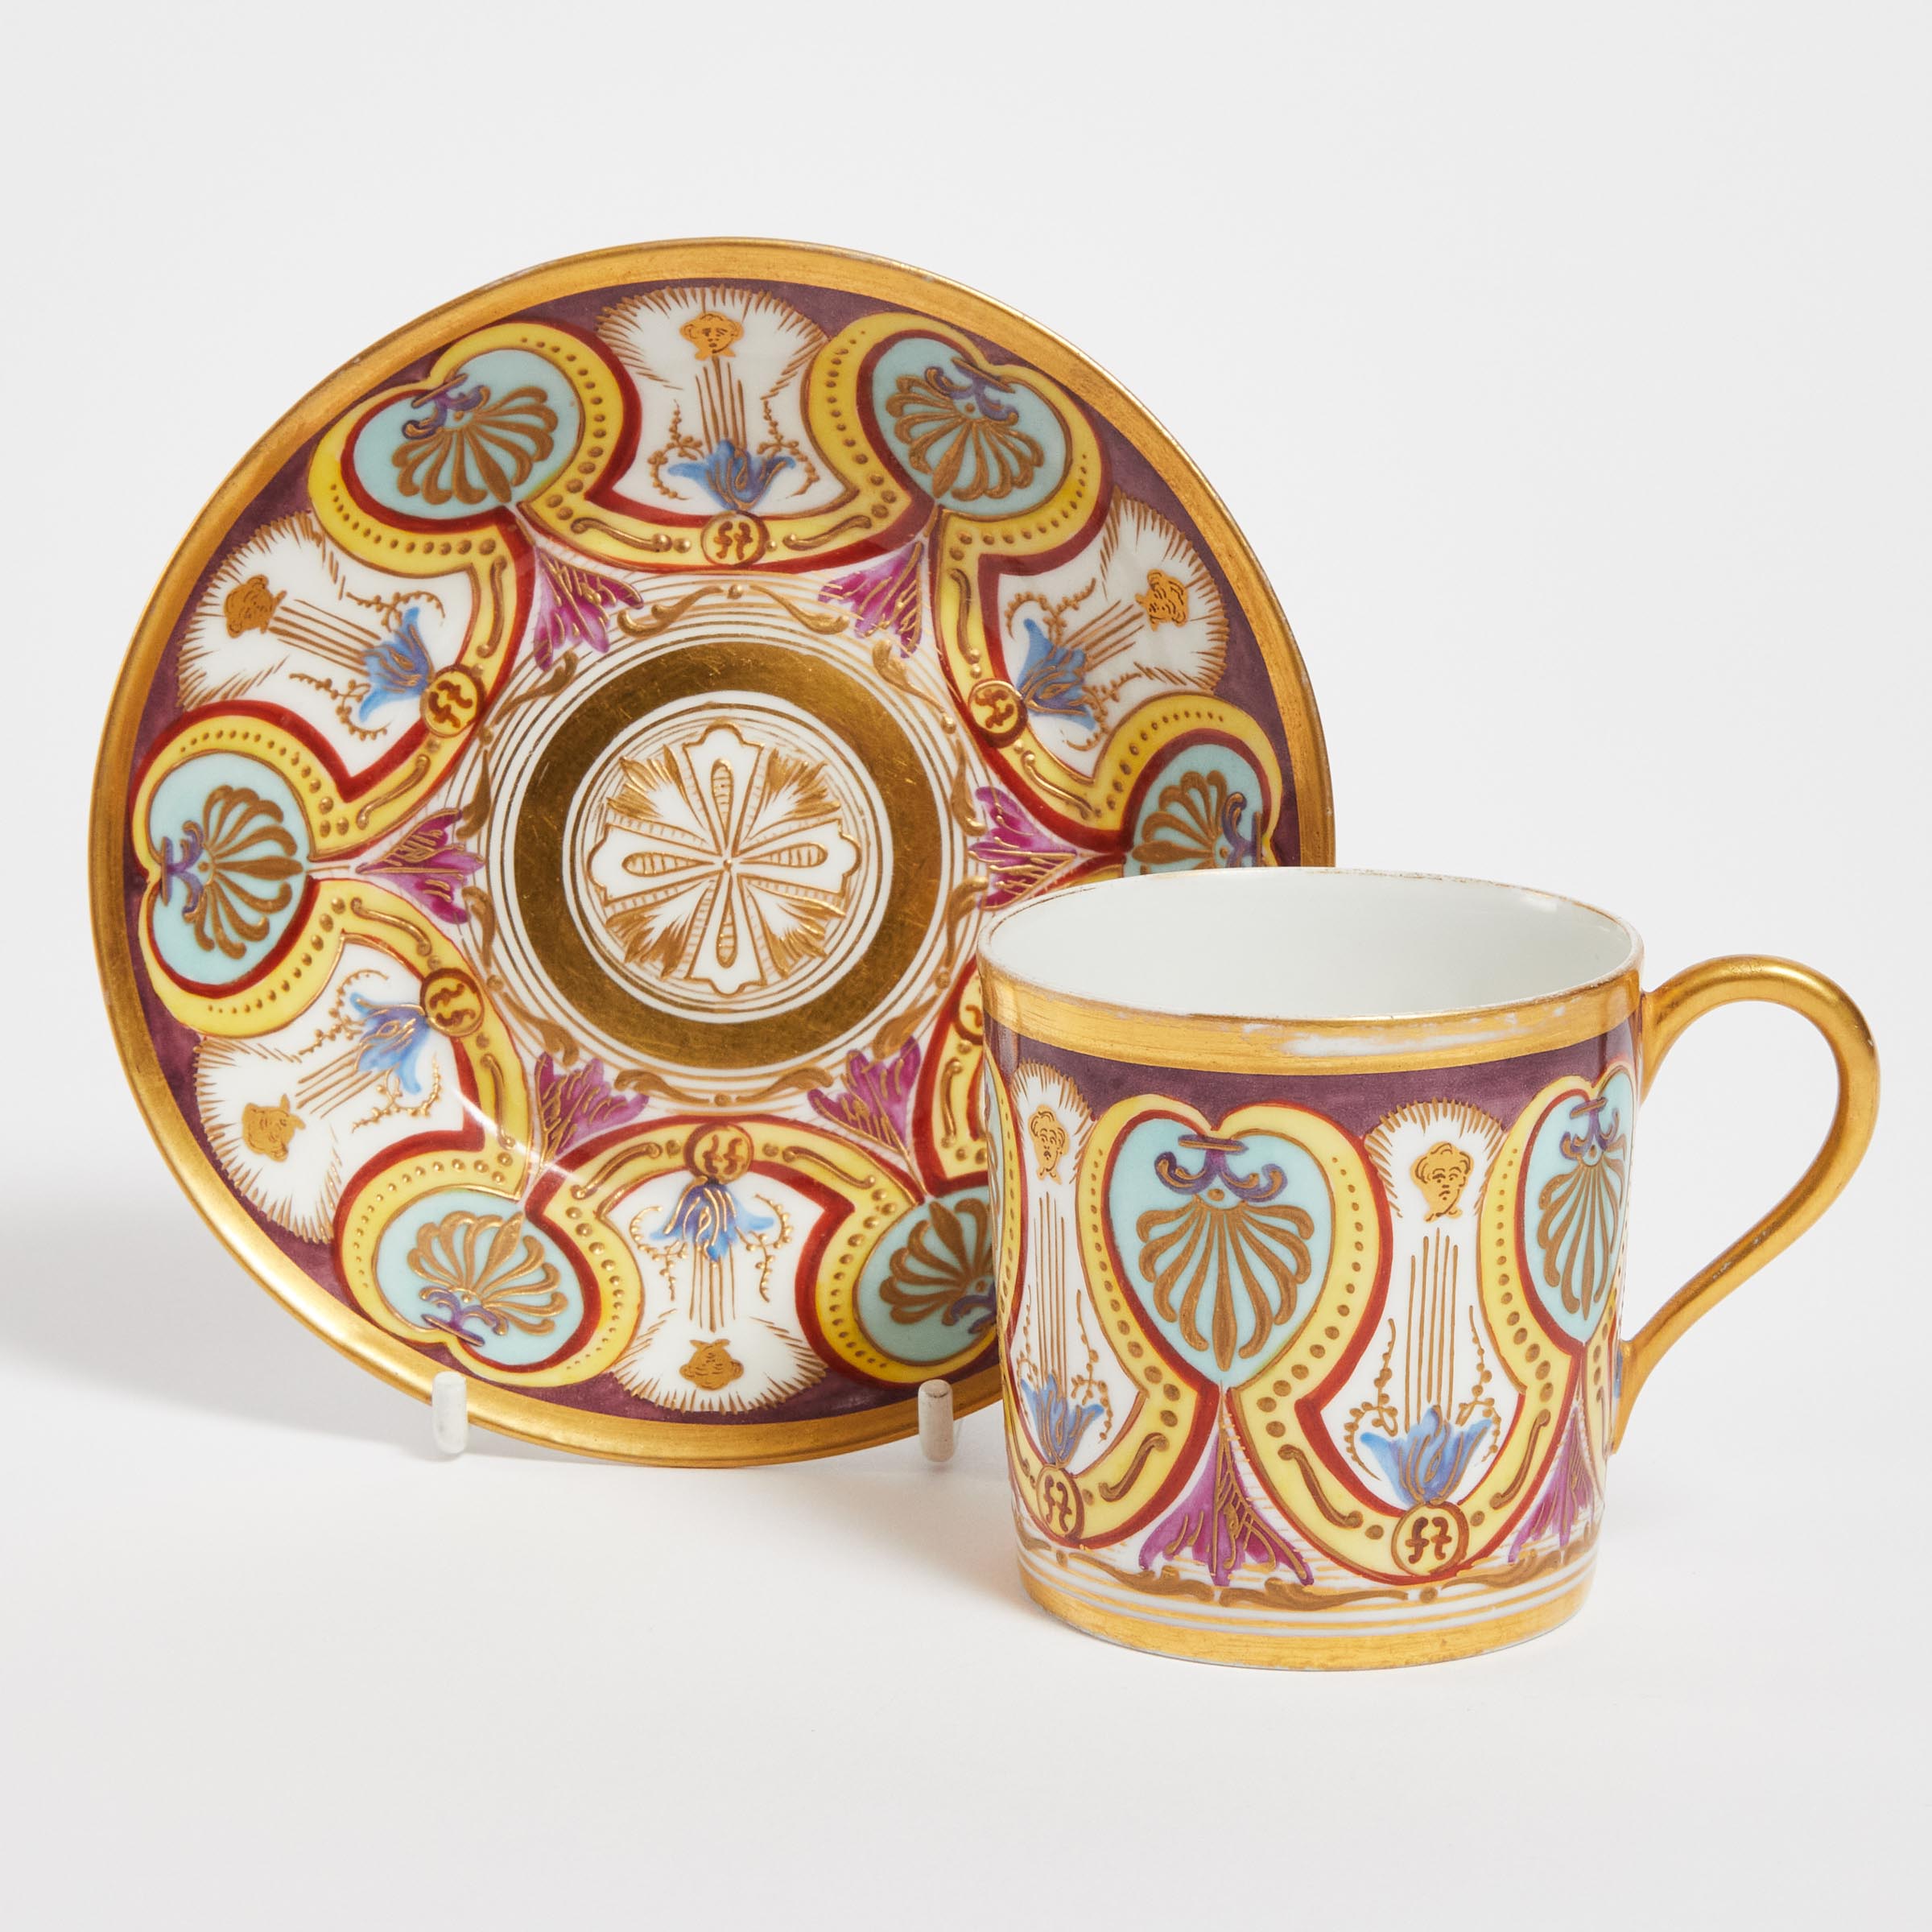 'Sèvres' Porcelain Coffee Can and Saucer, late 19th century, saucer diameter 5 in — 12.6 cm (2 Piece